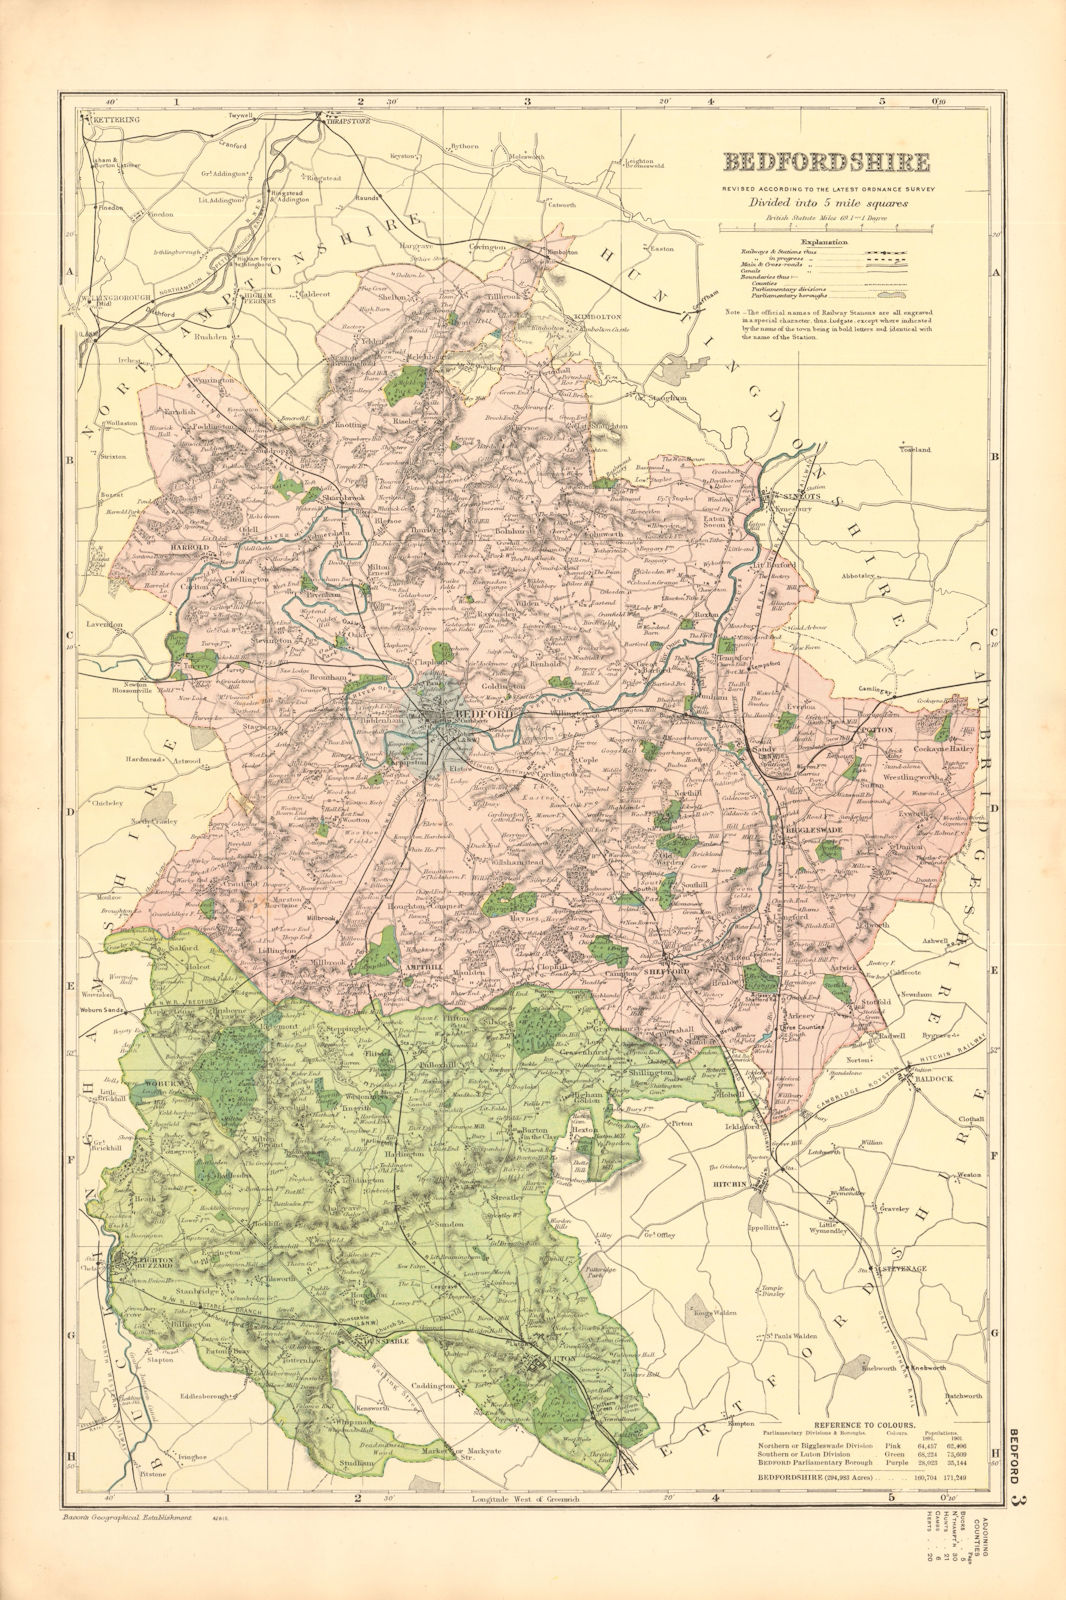 BEDFORDSHIRE. Showing Parliamentary divisions, boroughs & parks. BACON 1904 map